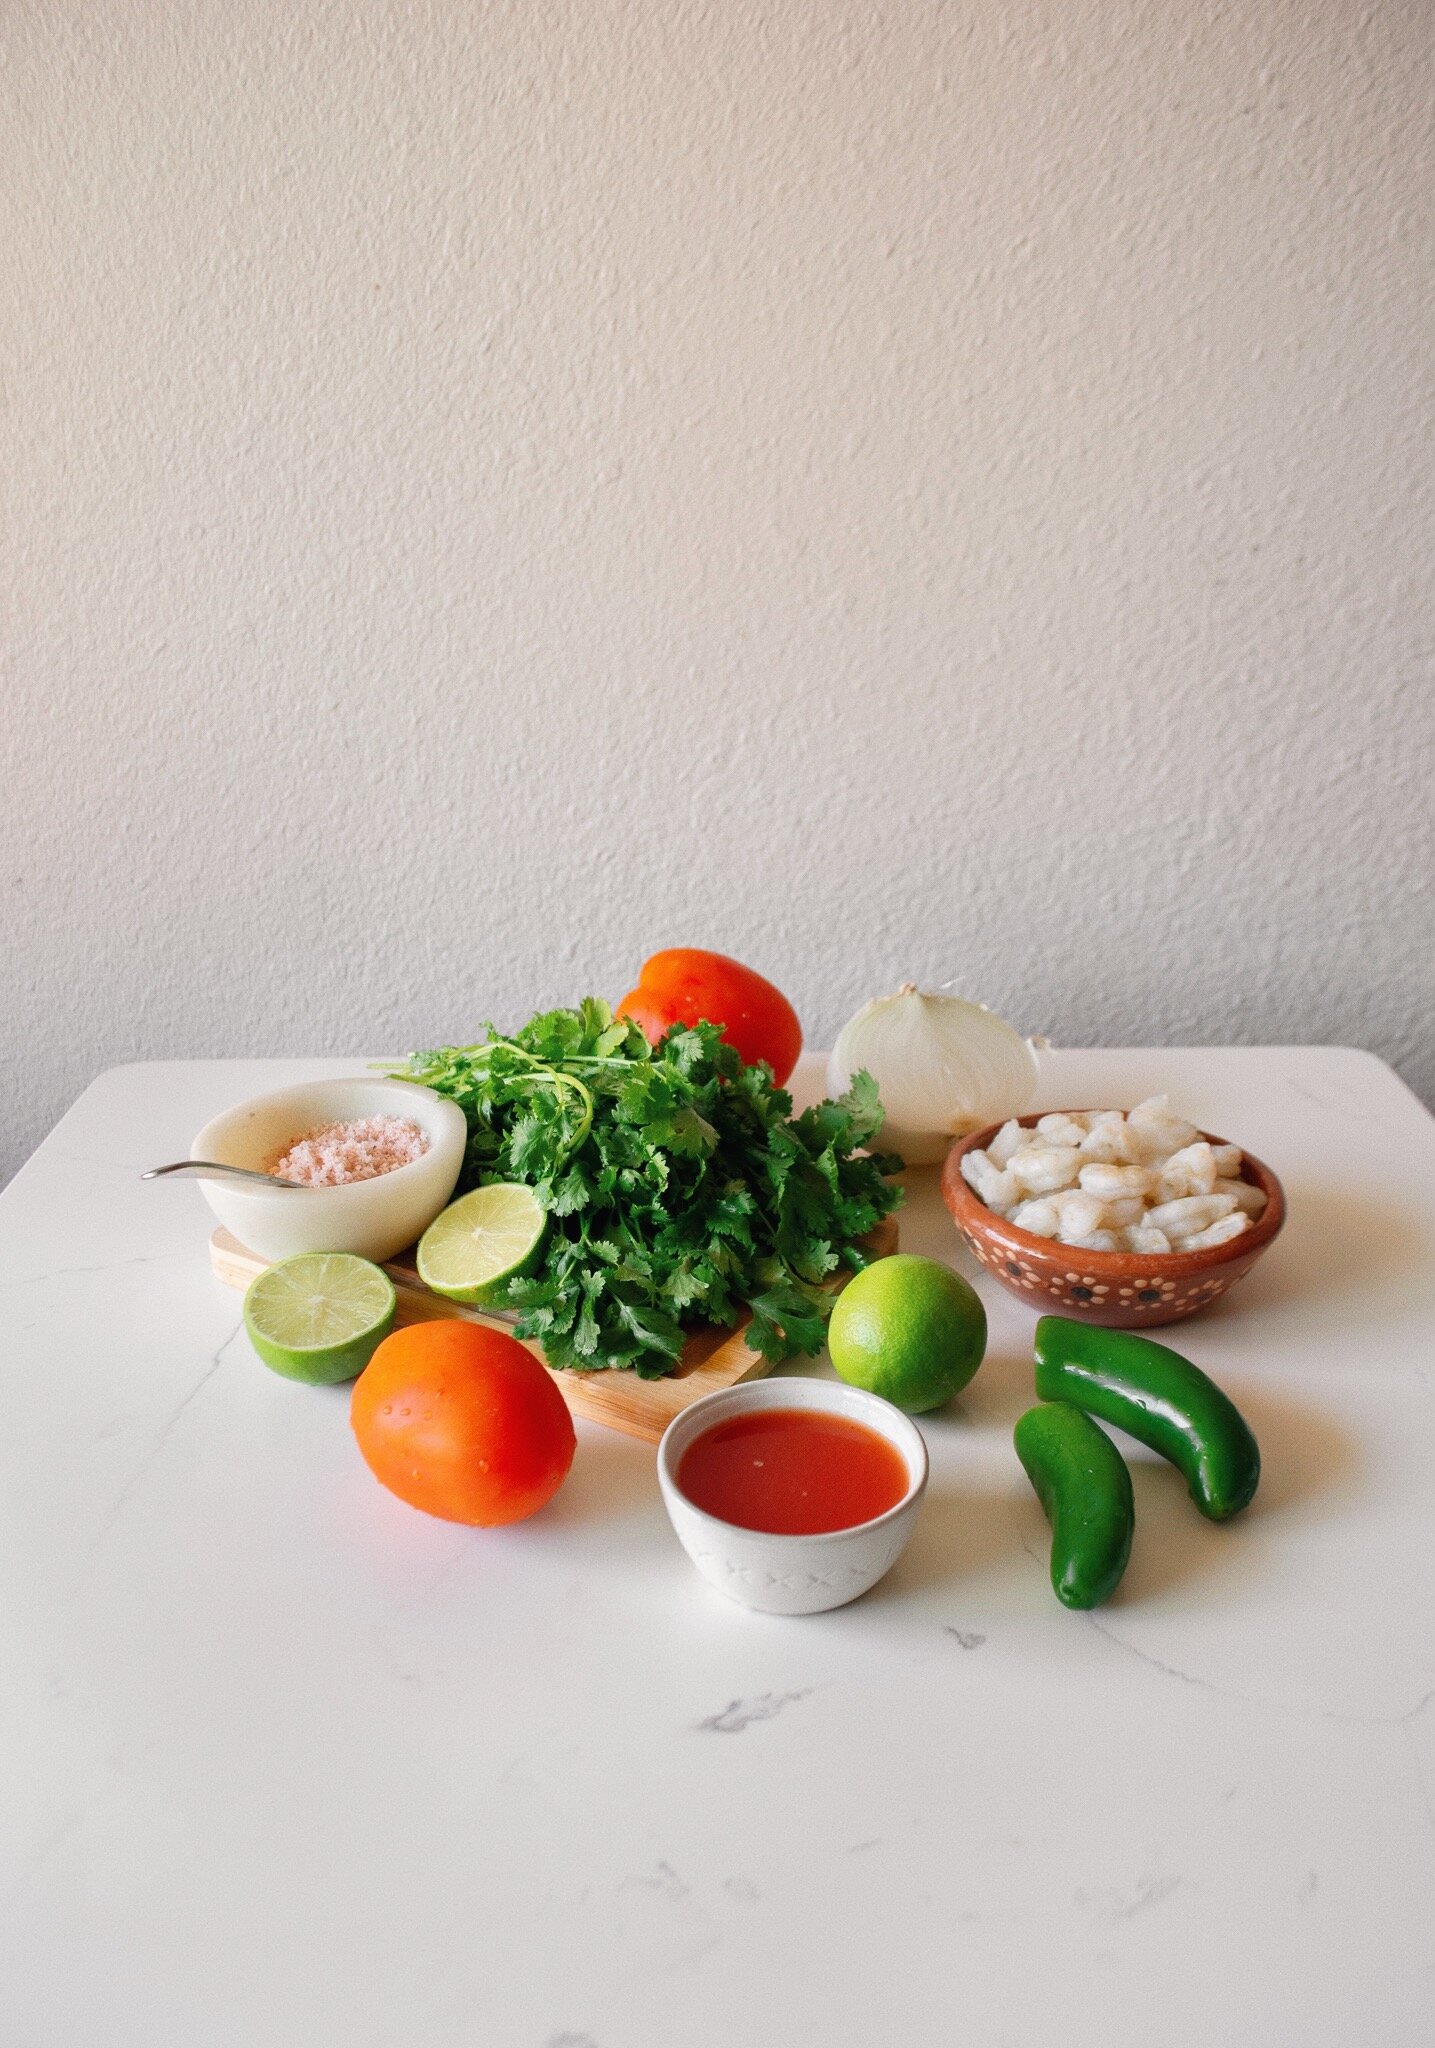 Layout of the Mexican Shrimp Ceviche with Clamato ingredients.